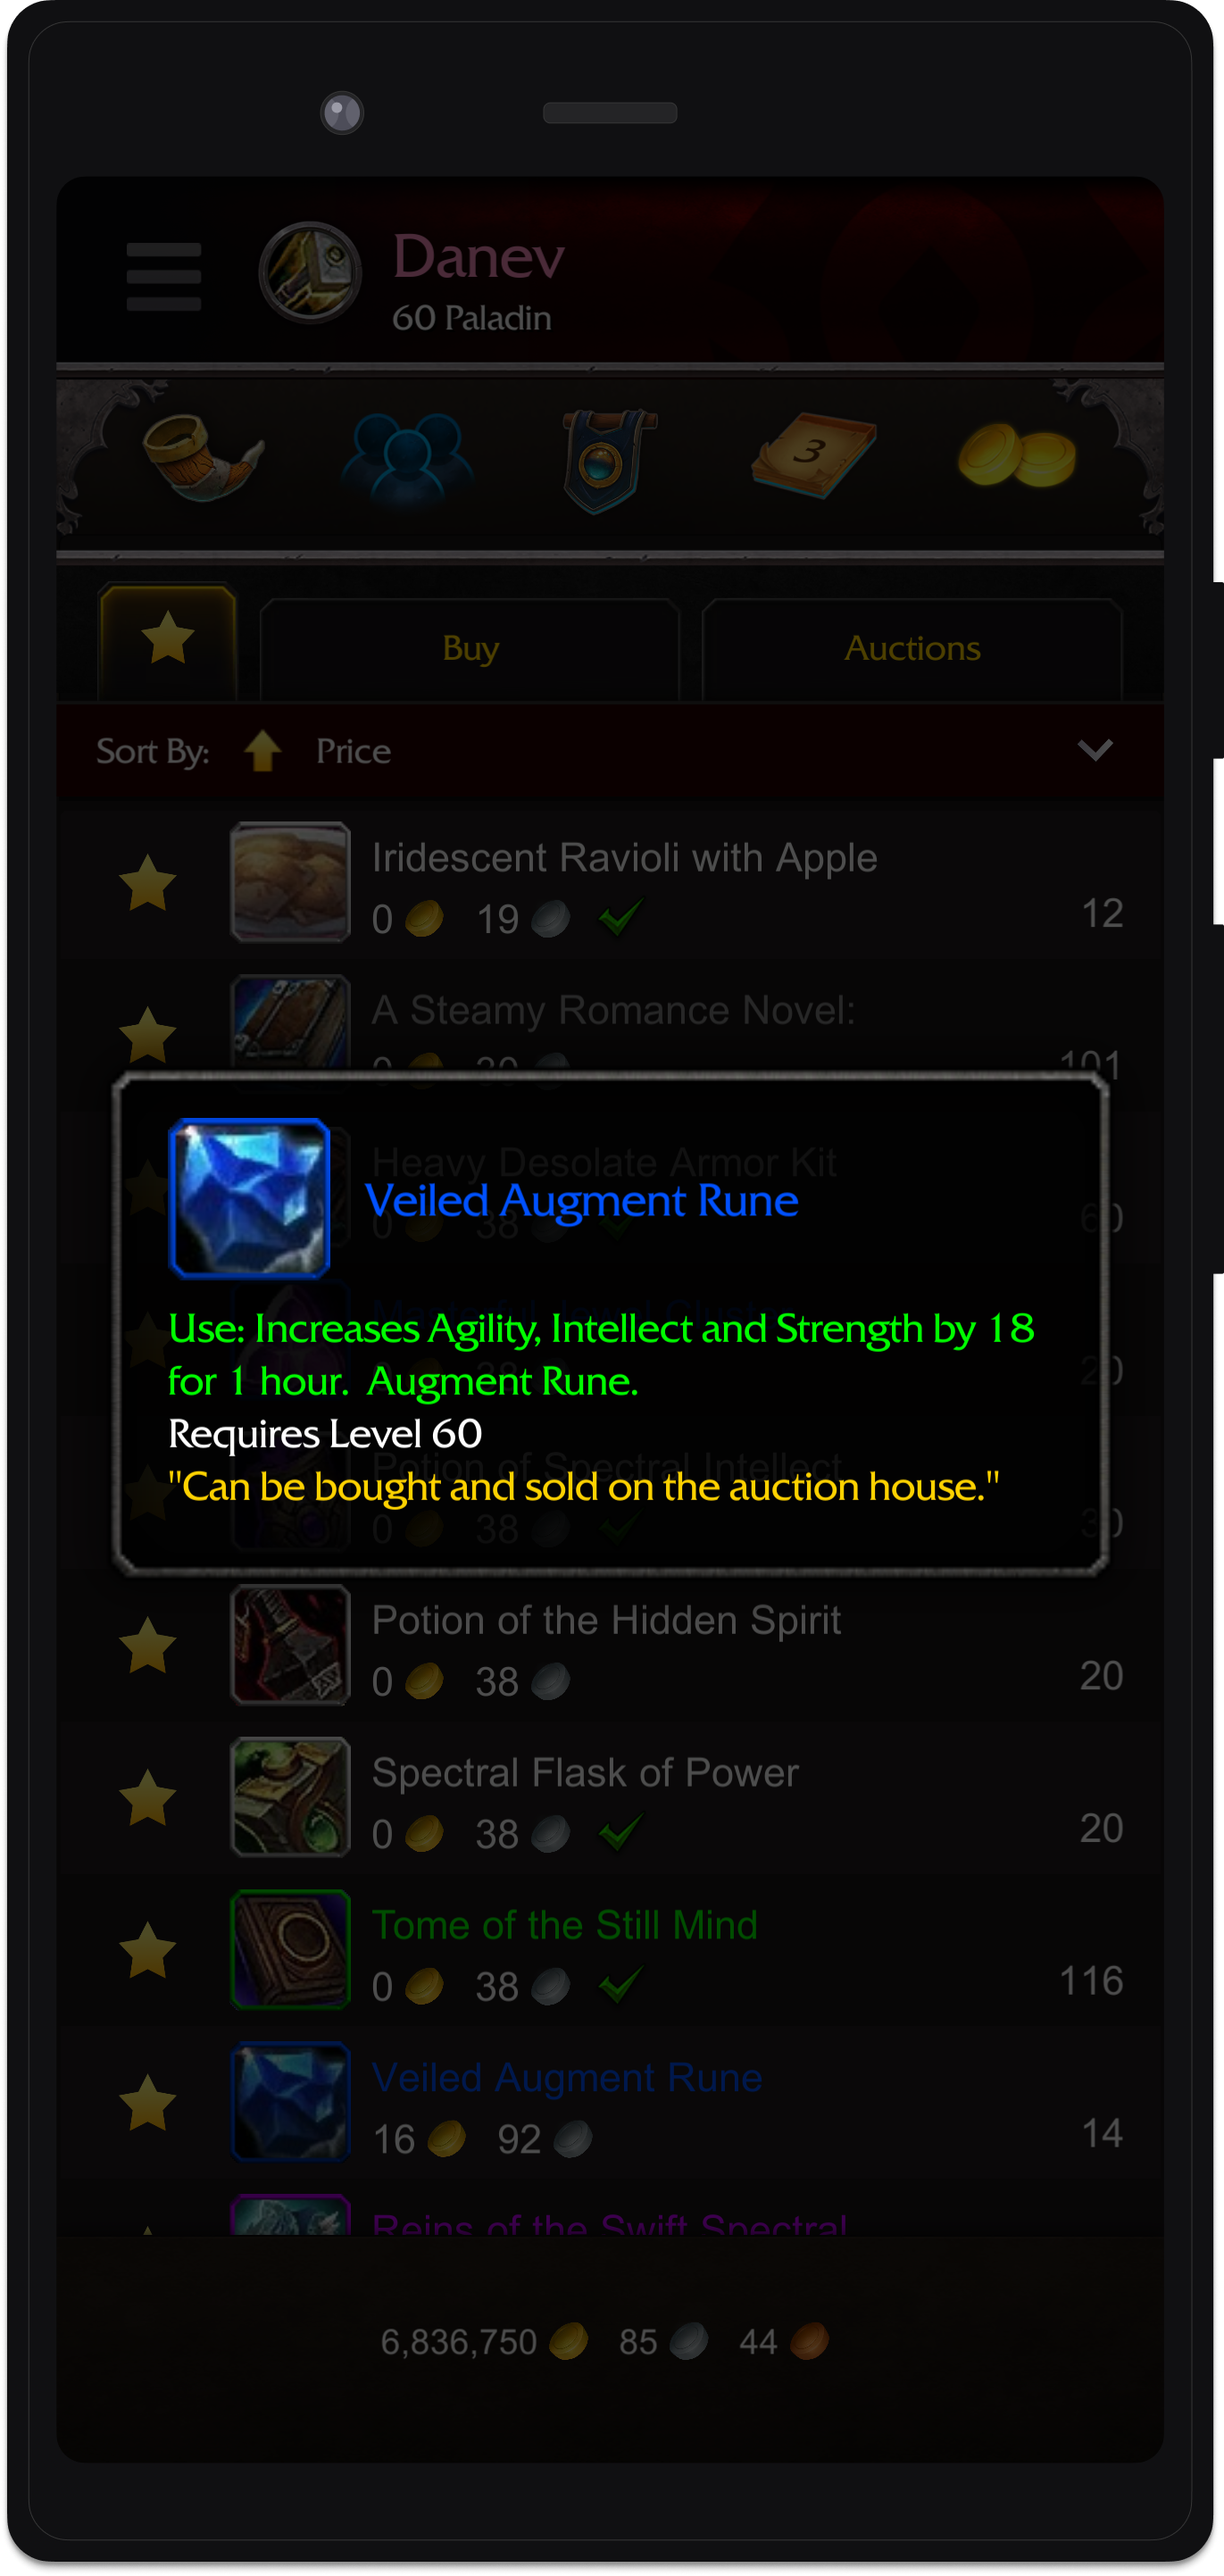 Auction House inteface showing a tooltip for a Veiled Augment Rune on a favorites listing.